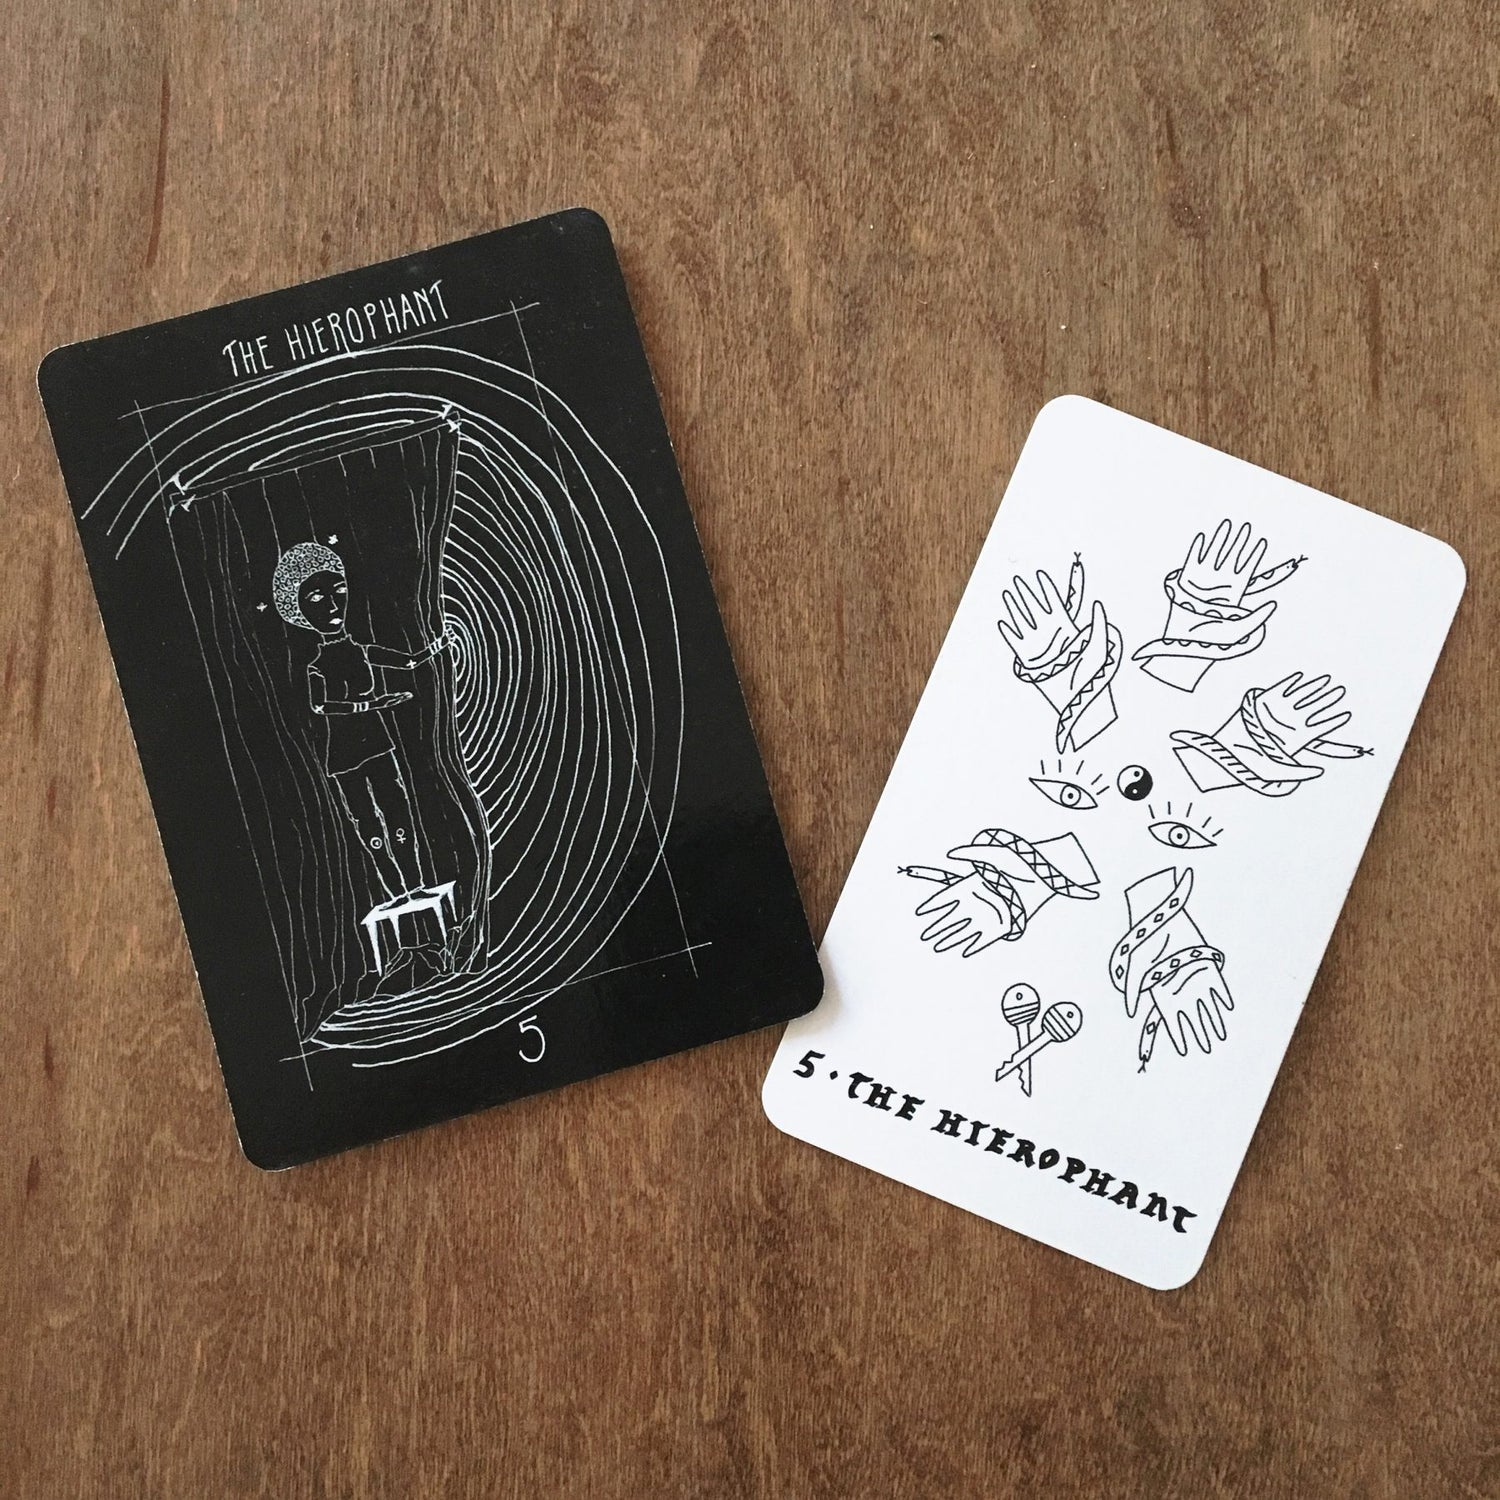 DISPATCHES FROM TAROT SALON: THE HIEROPHANT